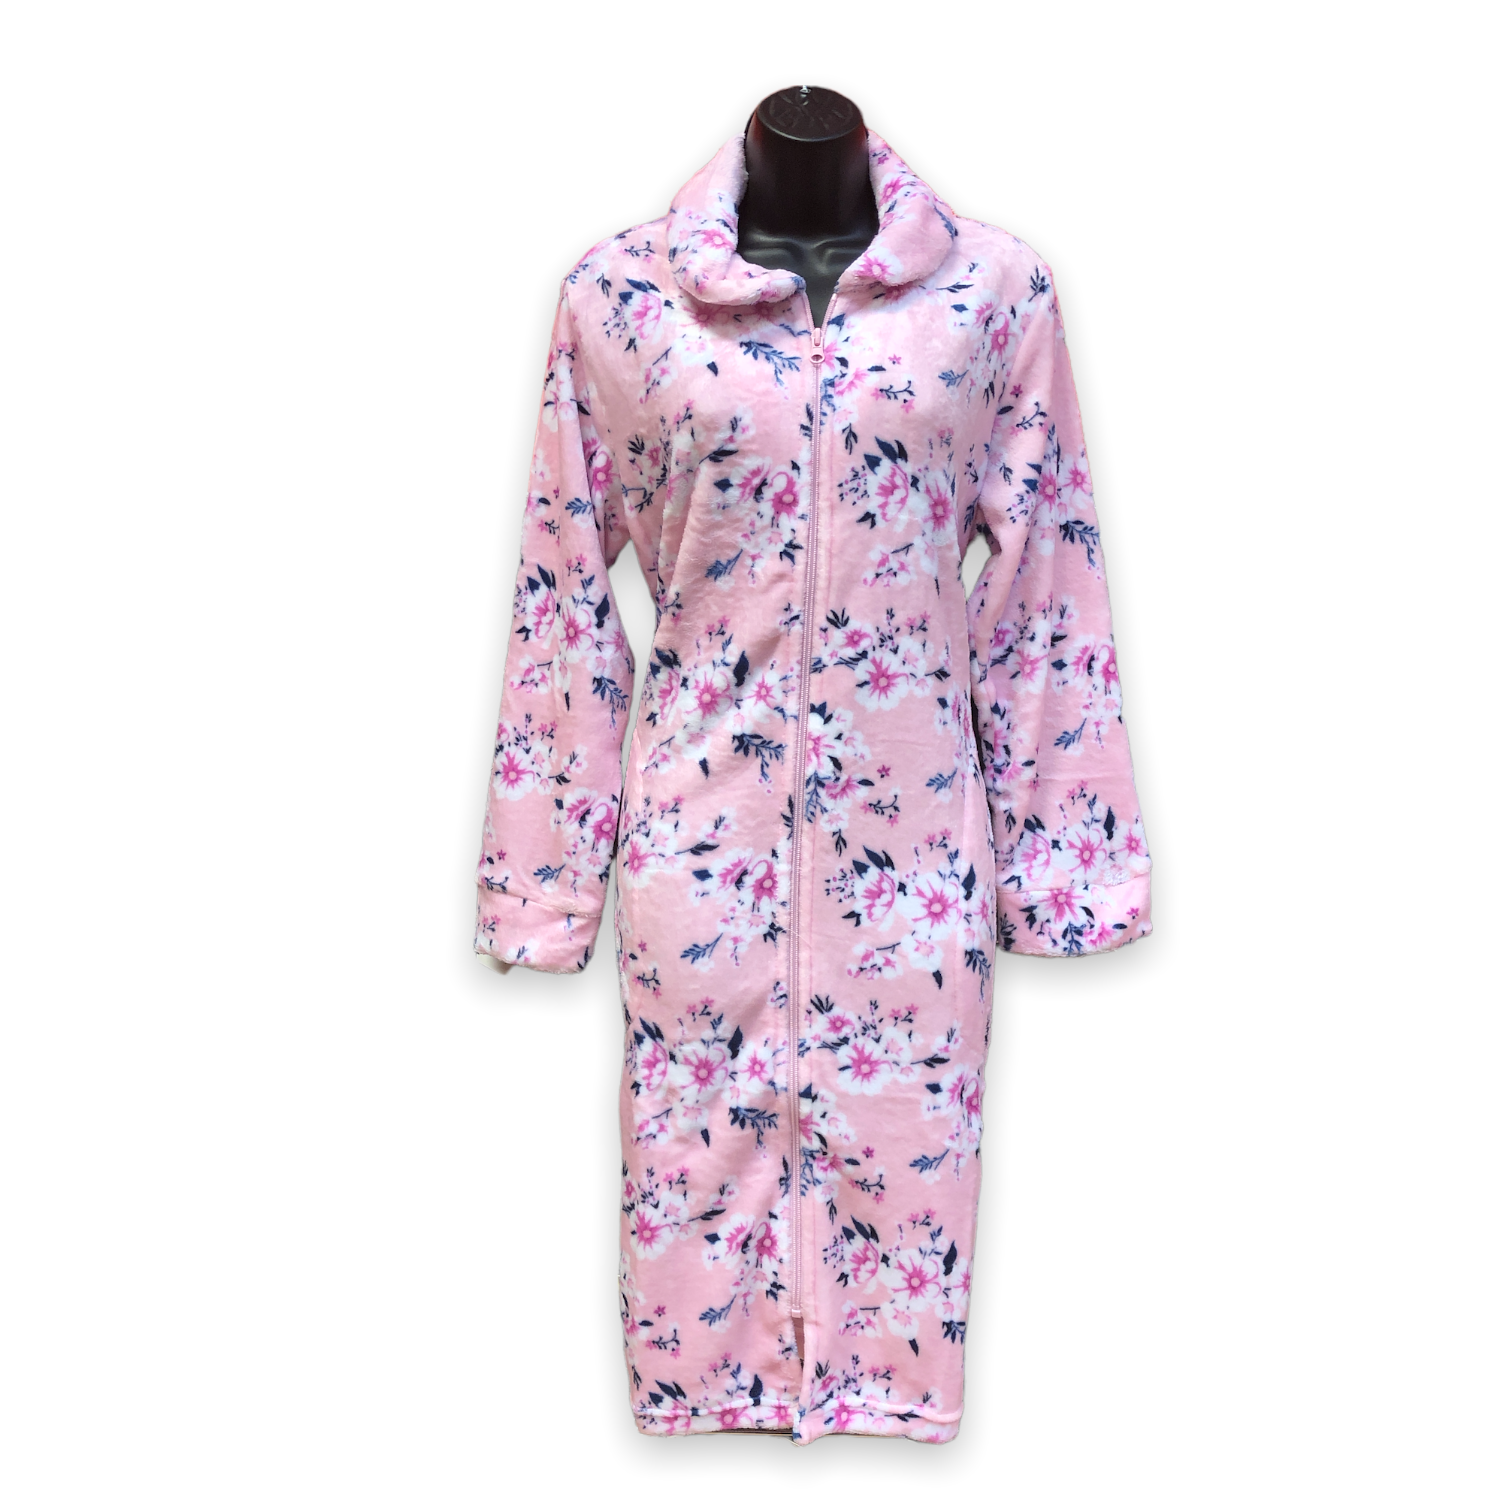 BULK BUY - Women's Plush Micropolar Printed Robes with Zip Front (6-Pack)